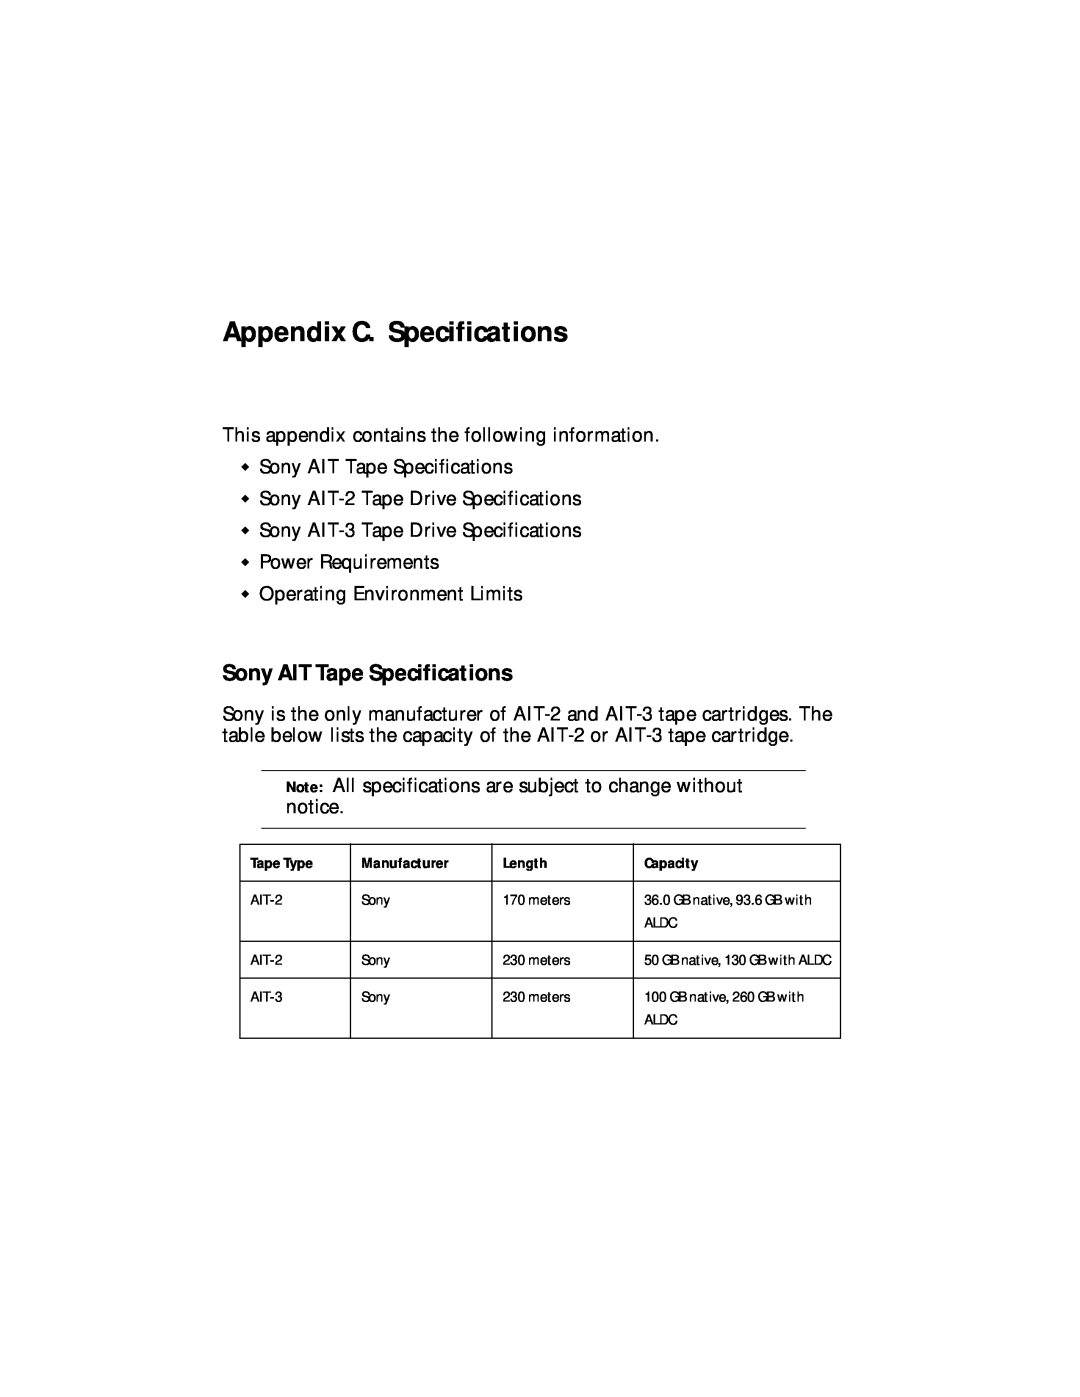 Spectra Logic Spectra 12000 manual Appendix C. Specifications, Sony AIT Tape Specifications 